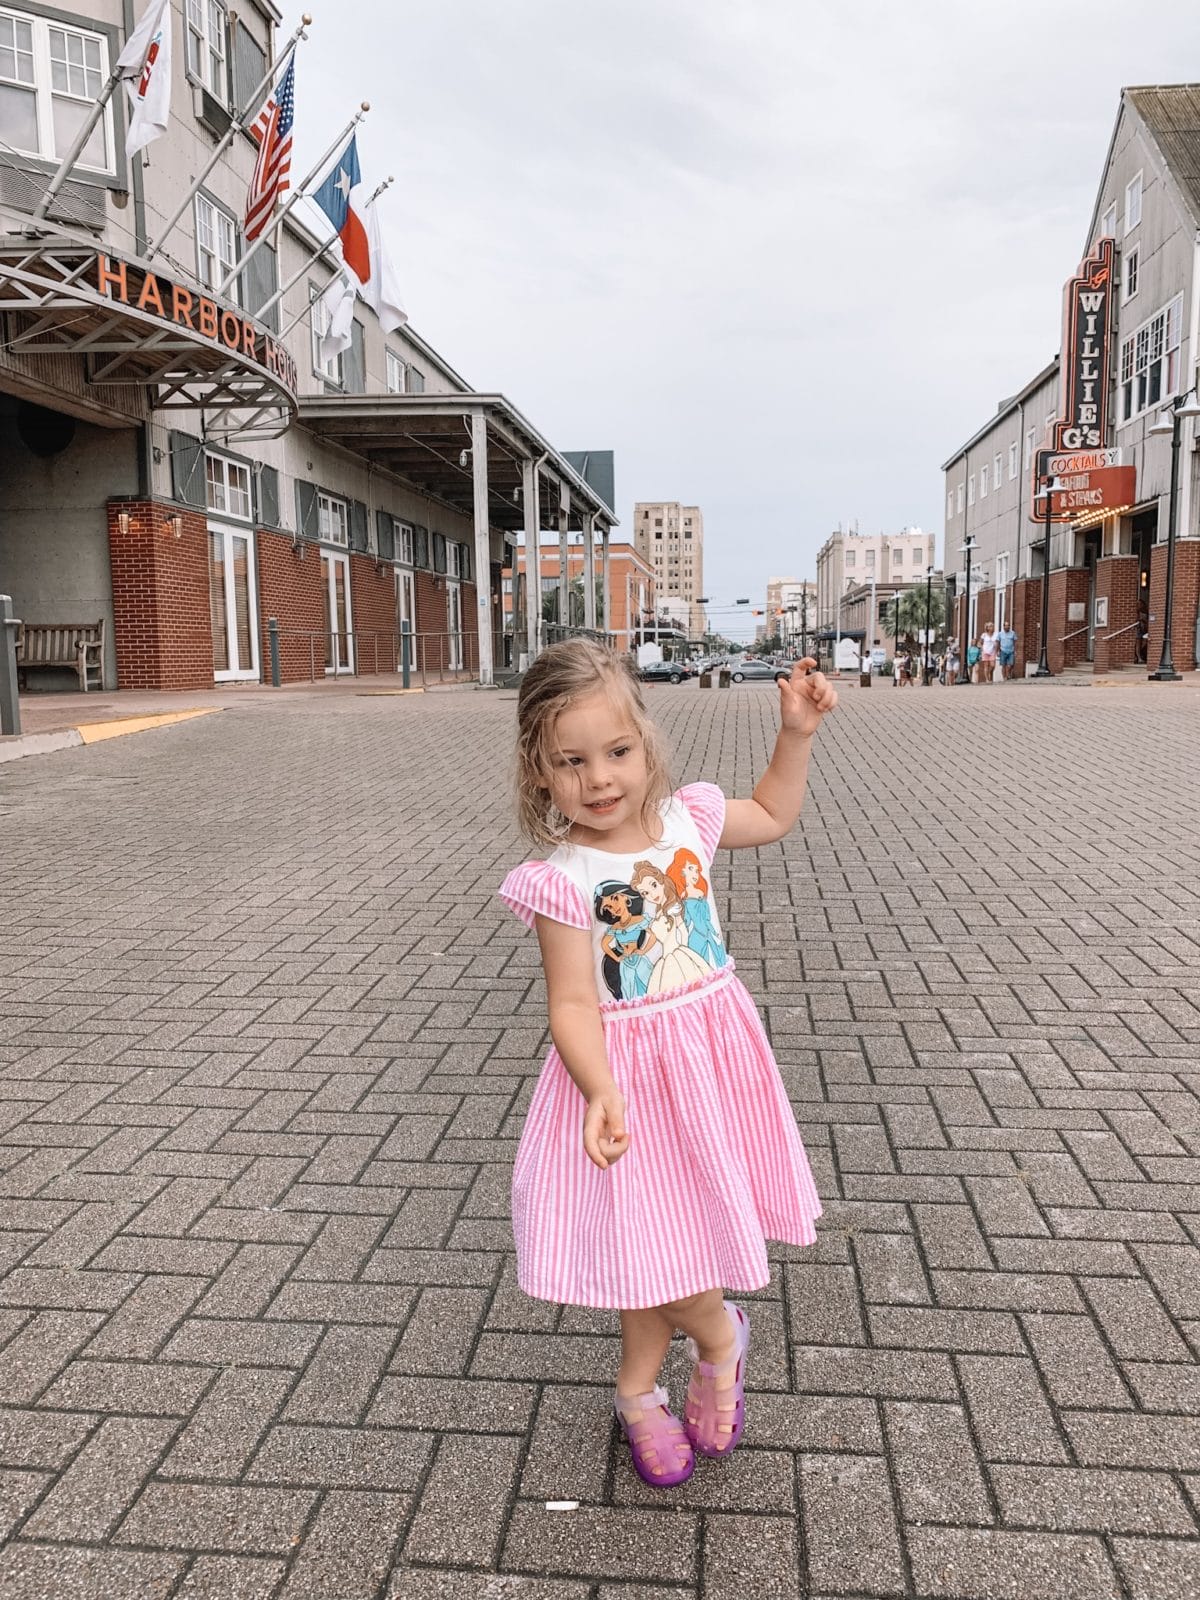 48 Hours in Galveston - Toddlers princess dress